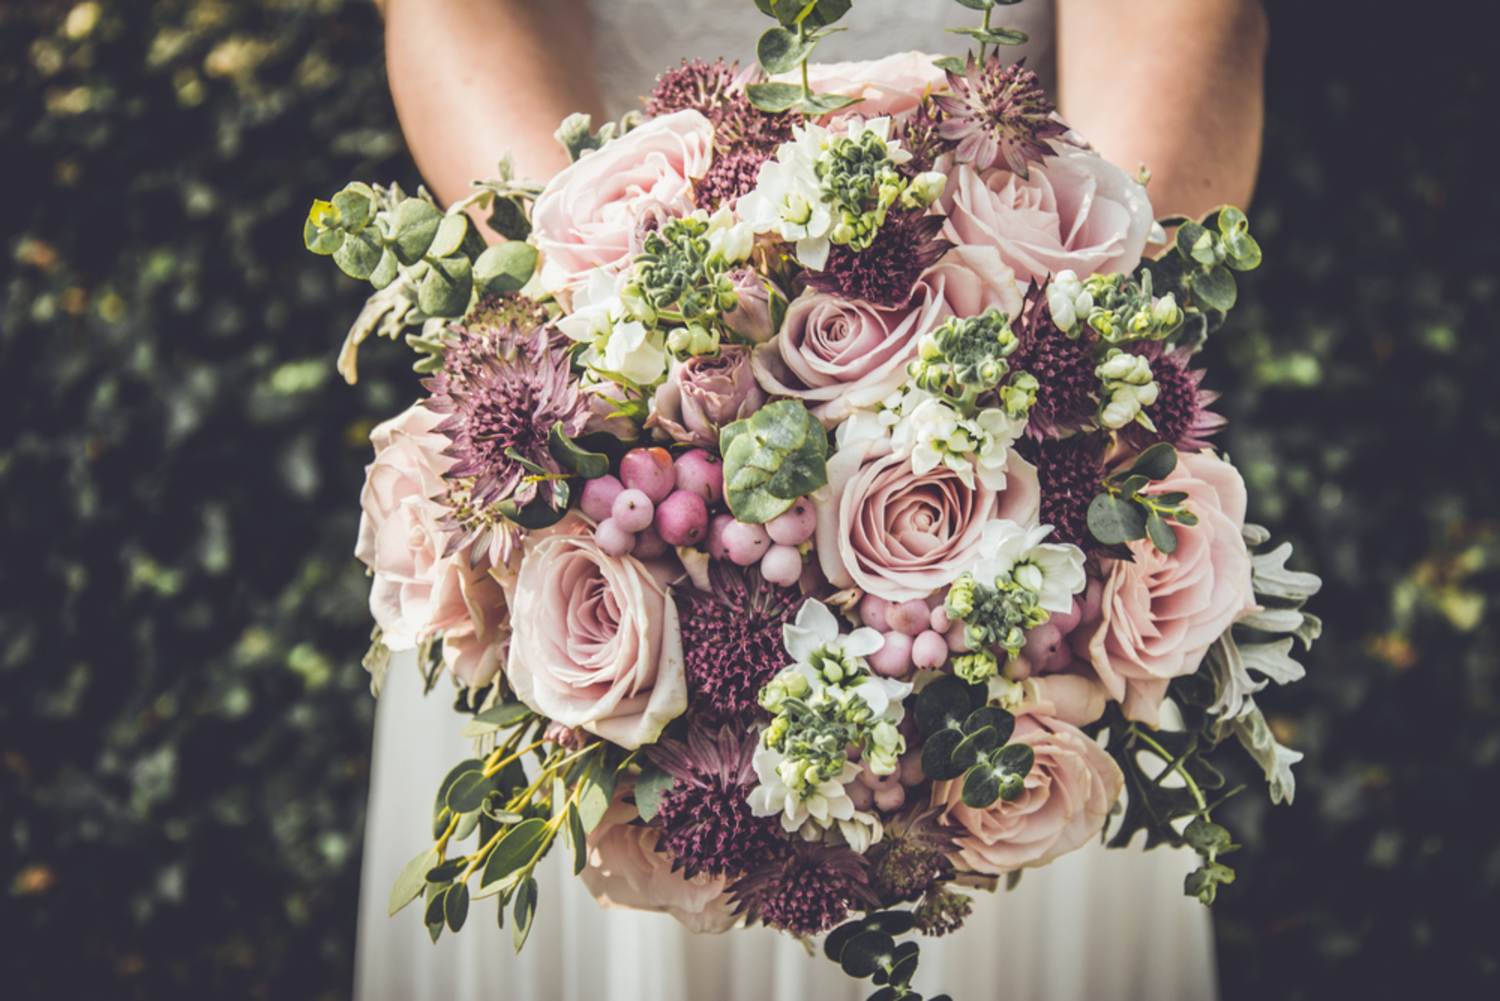 Wedding Flowers - Wedding Project Management in Gold Coast, QLD